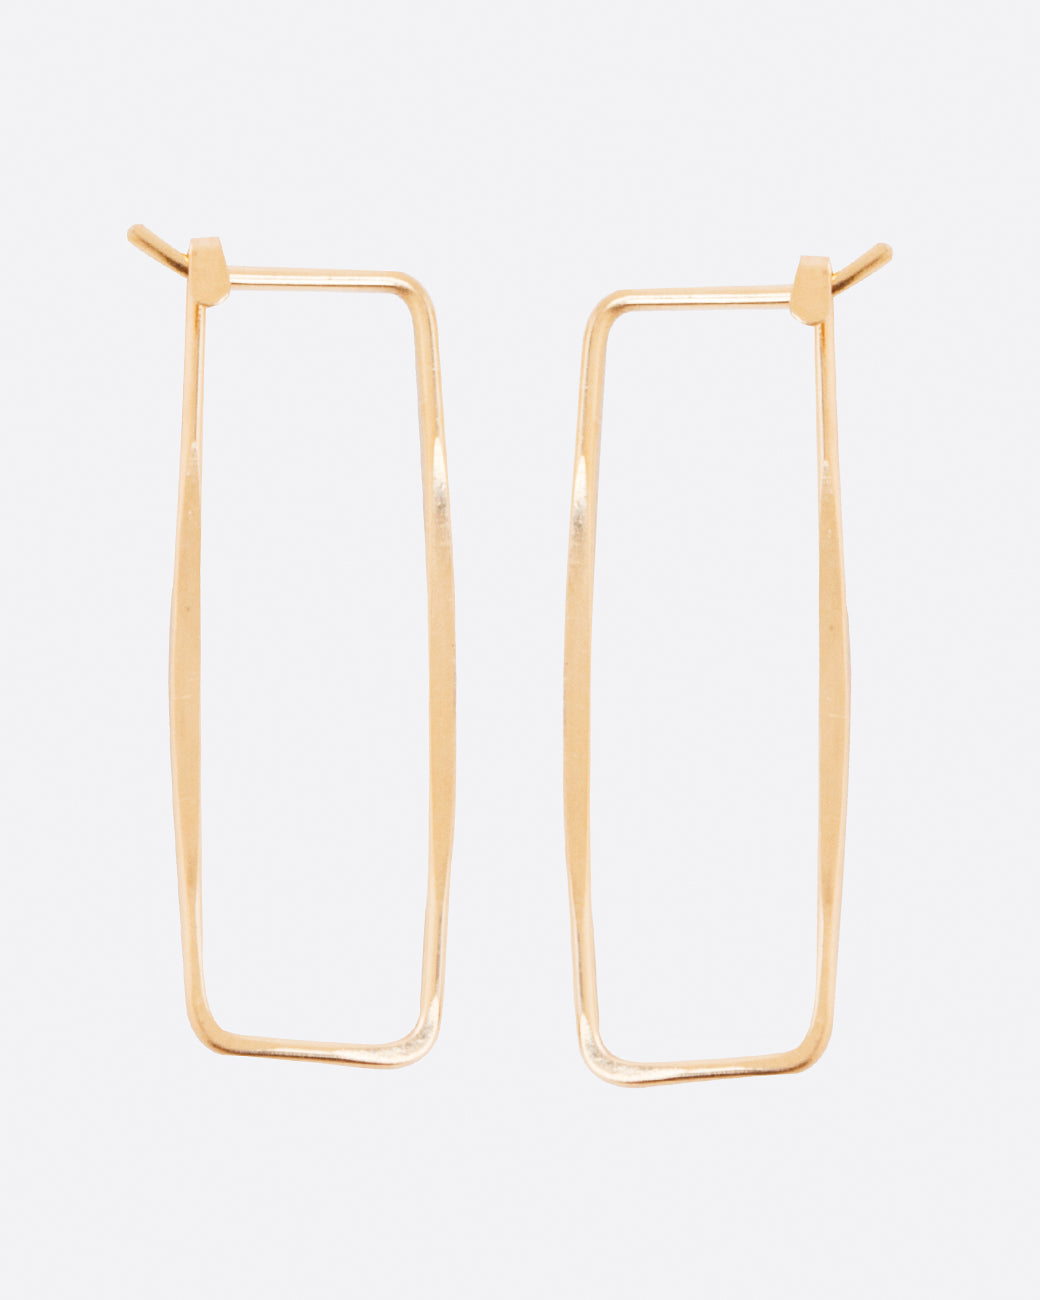 Fairmined gold, hand-hammered, small rectangle hoops that close upon themselves.